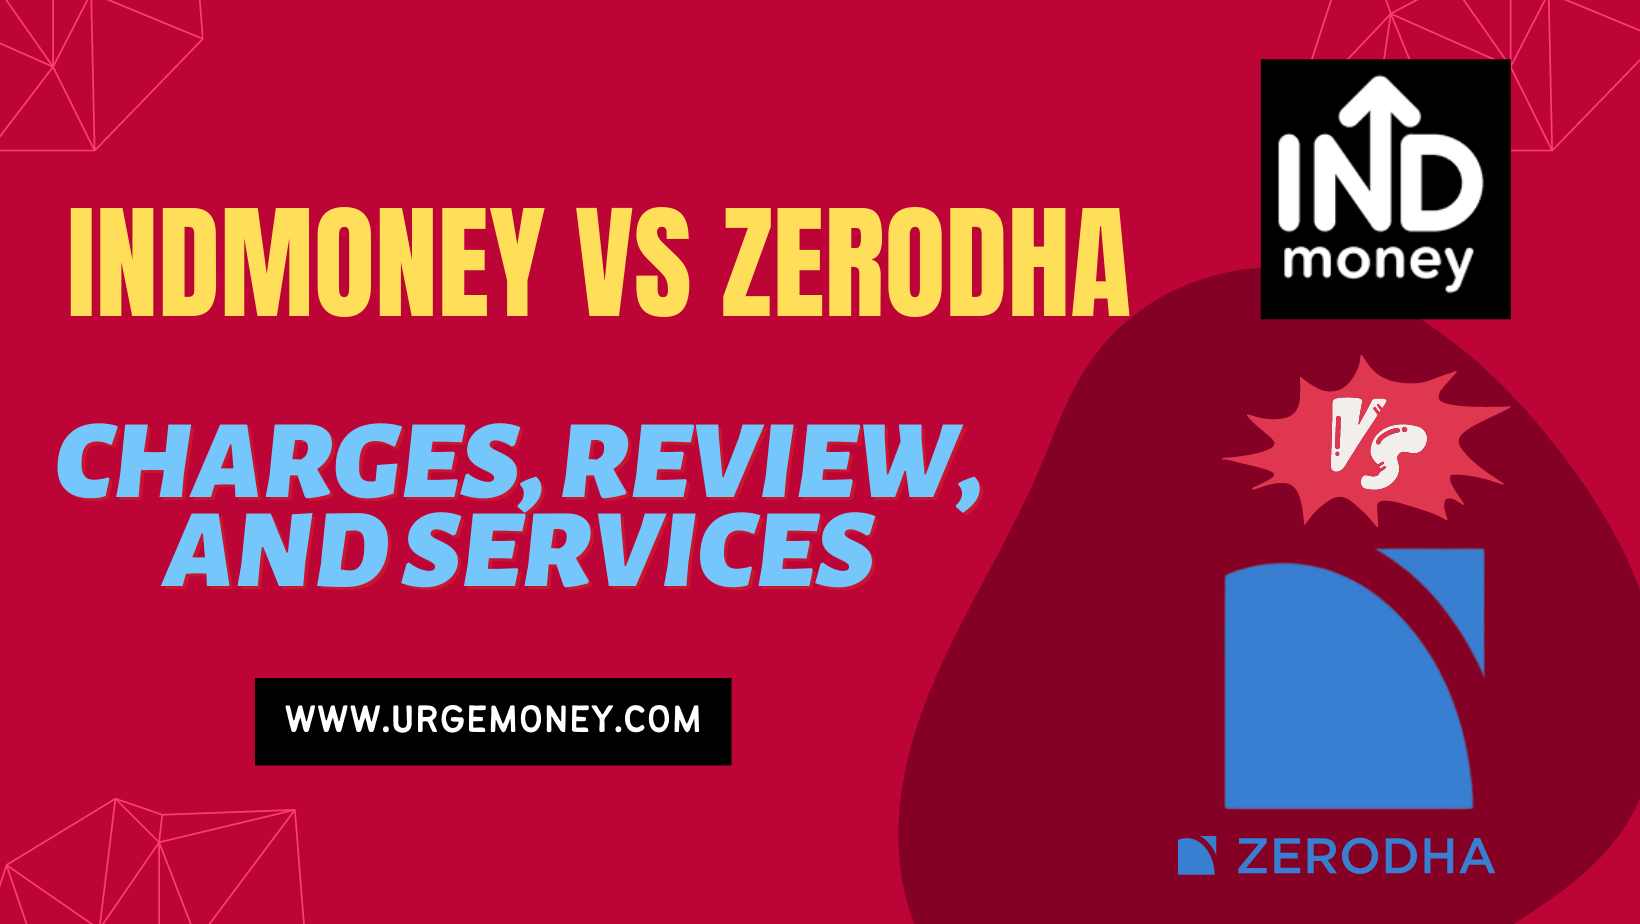 INDmoney vs Zerodha Charges, Review, and Services